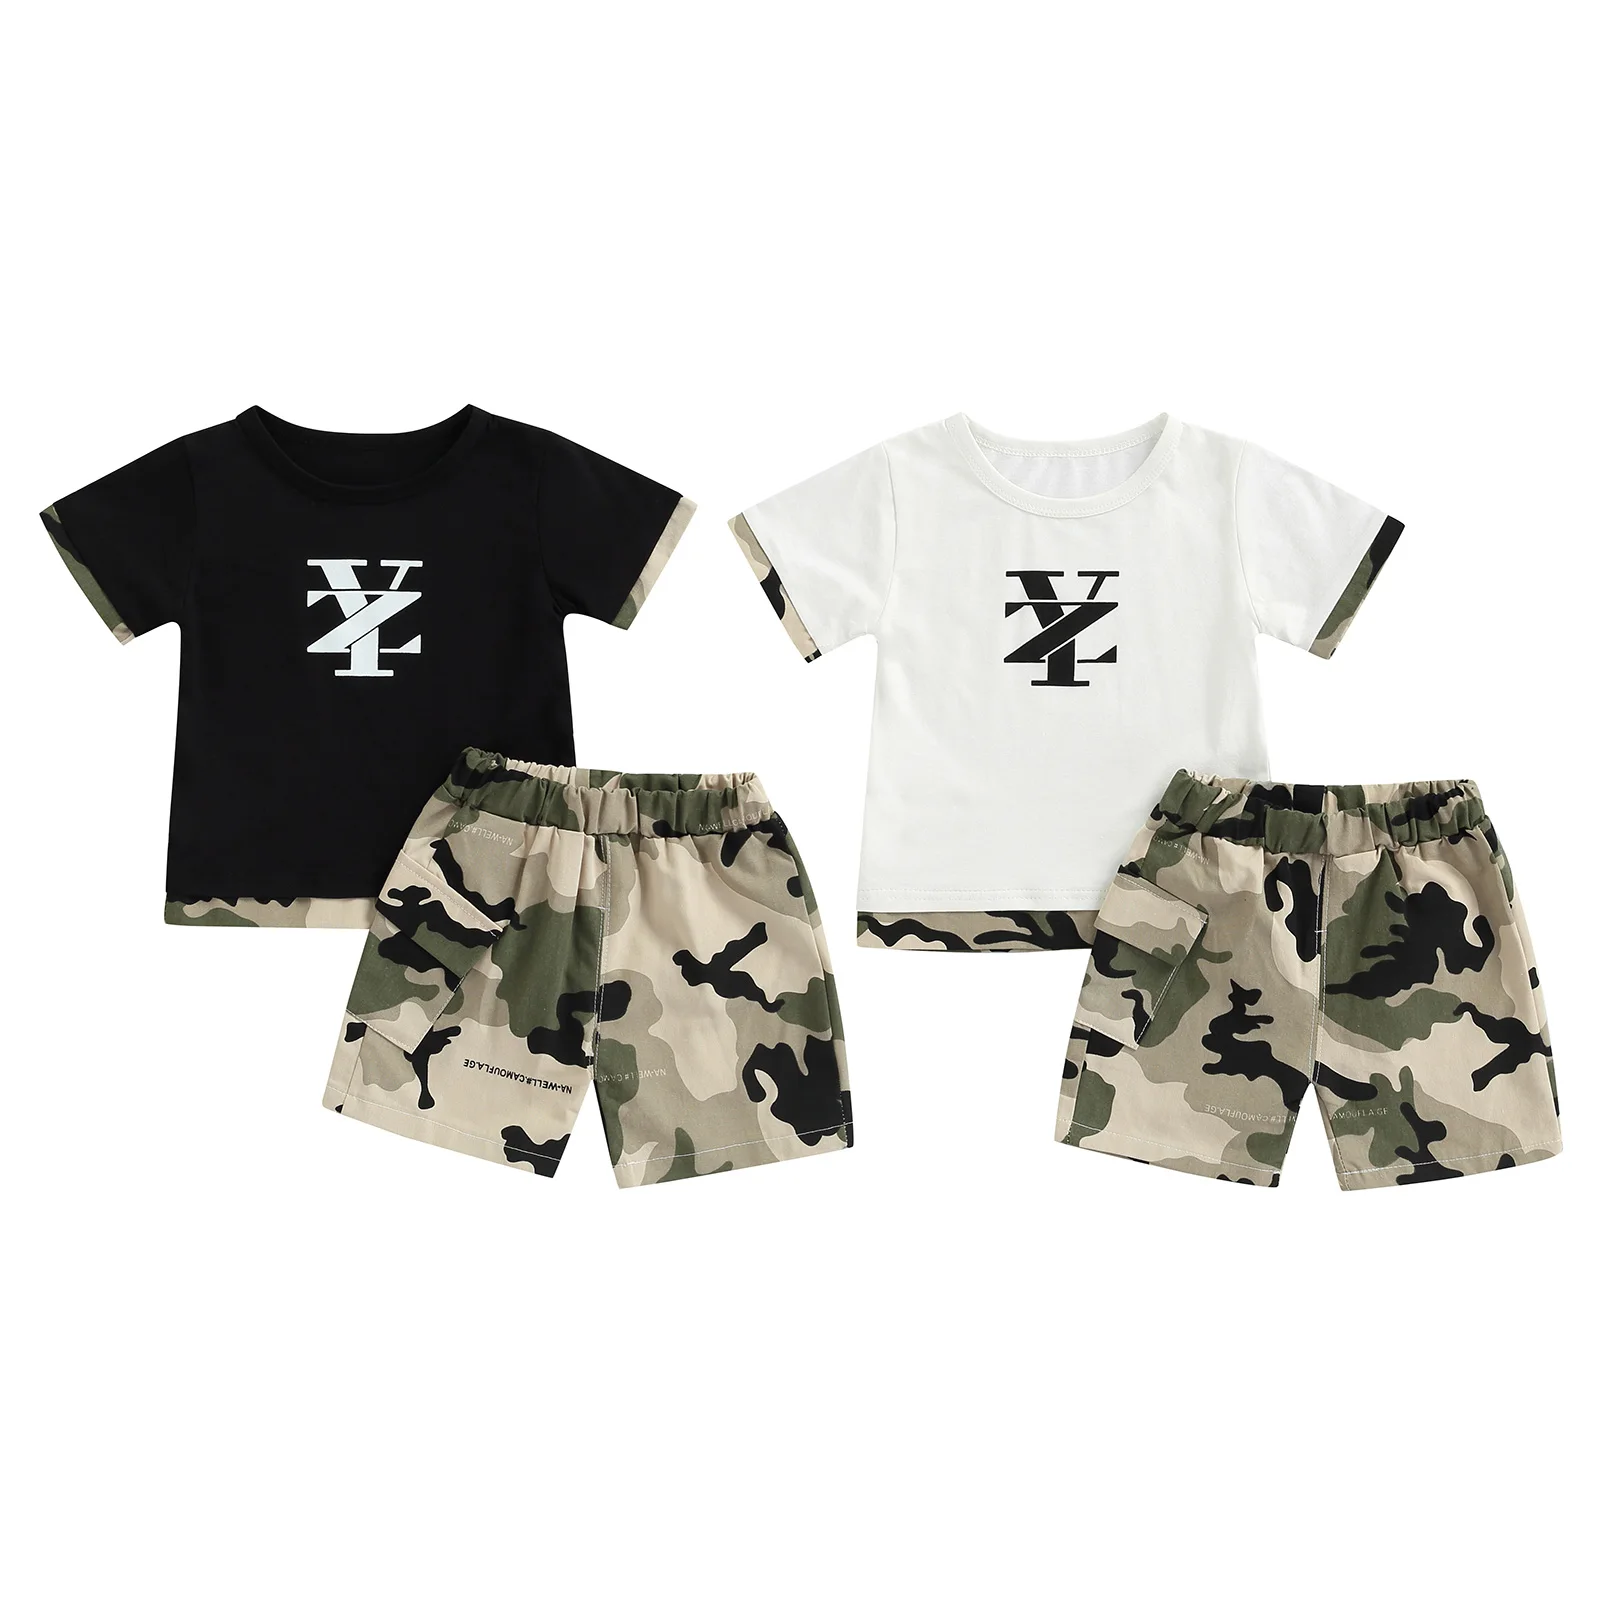 

Toddler Kids Baby Boys Clothing 2Pieces Summer Cotton Outfit Letter Print Round Neck Short Sleeve T-Shirts Camouflage Shorts